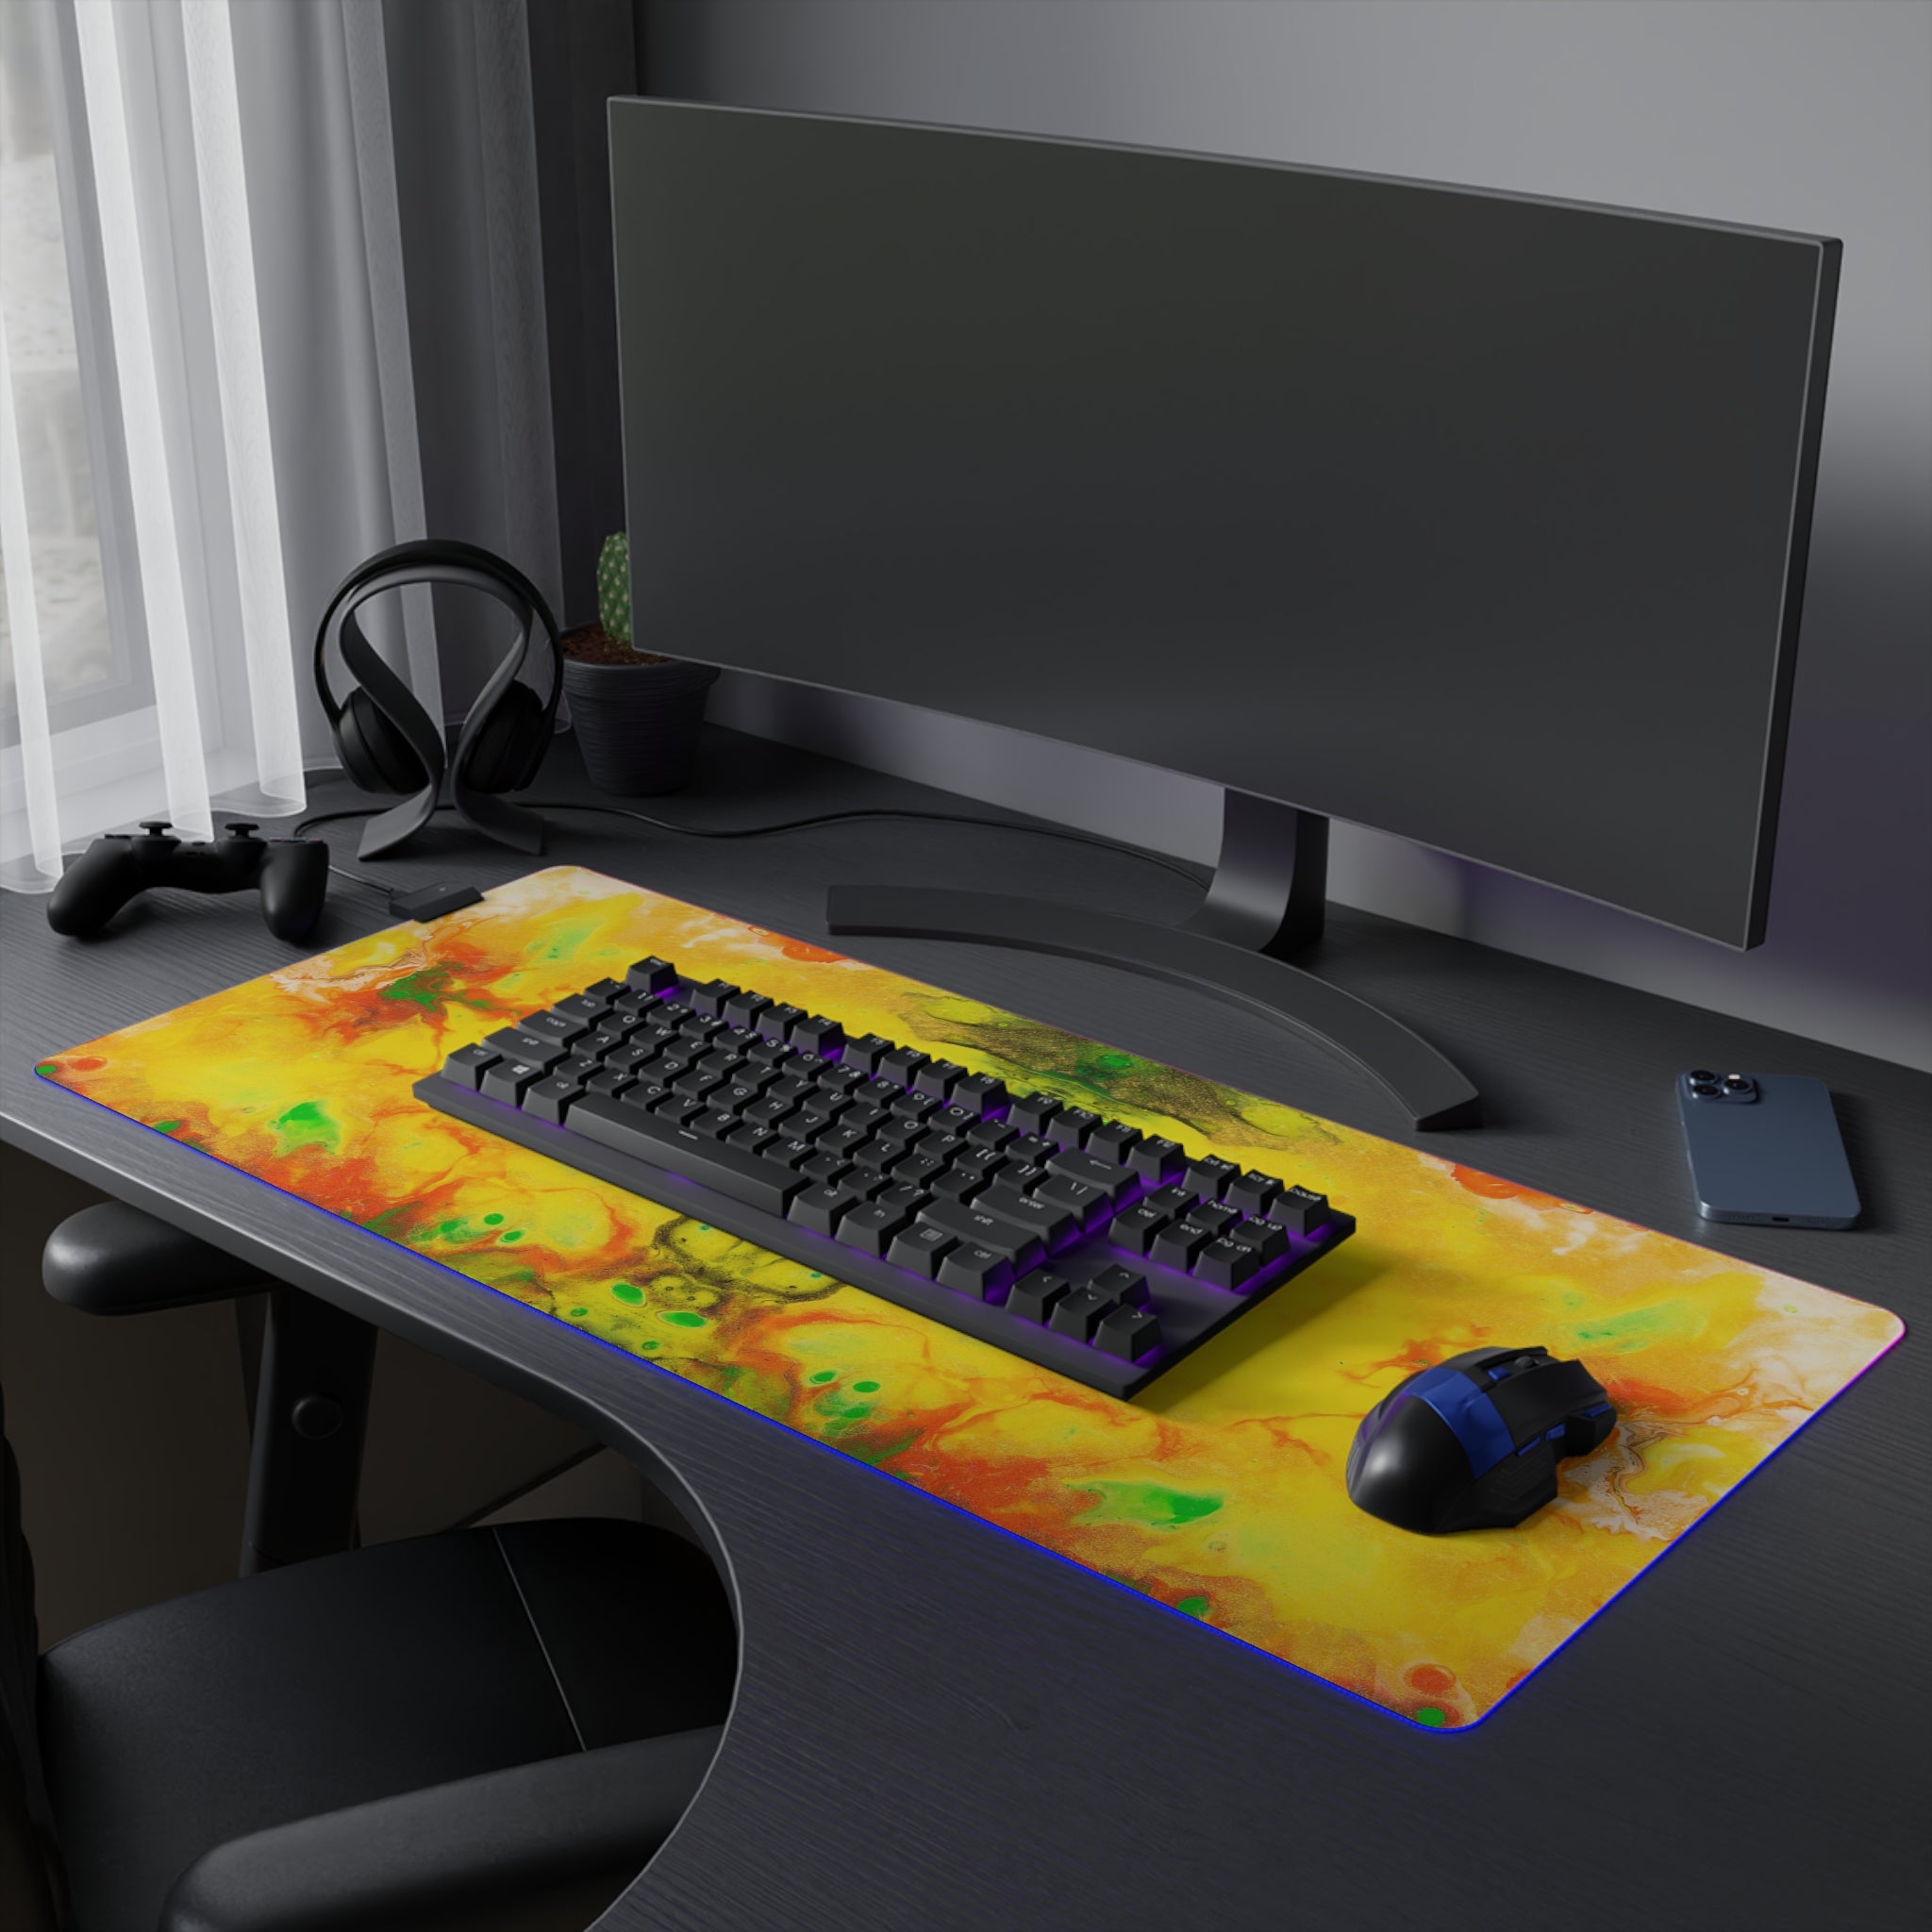 Bloom Of Fire - LED Gaming Mouse Pad